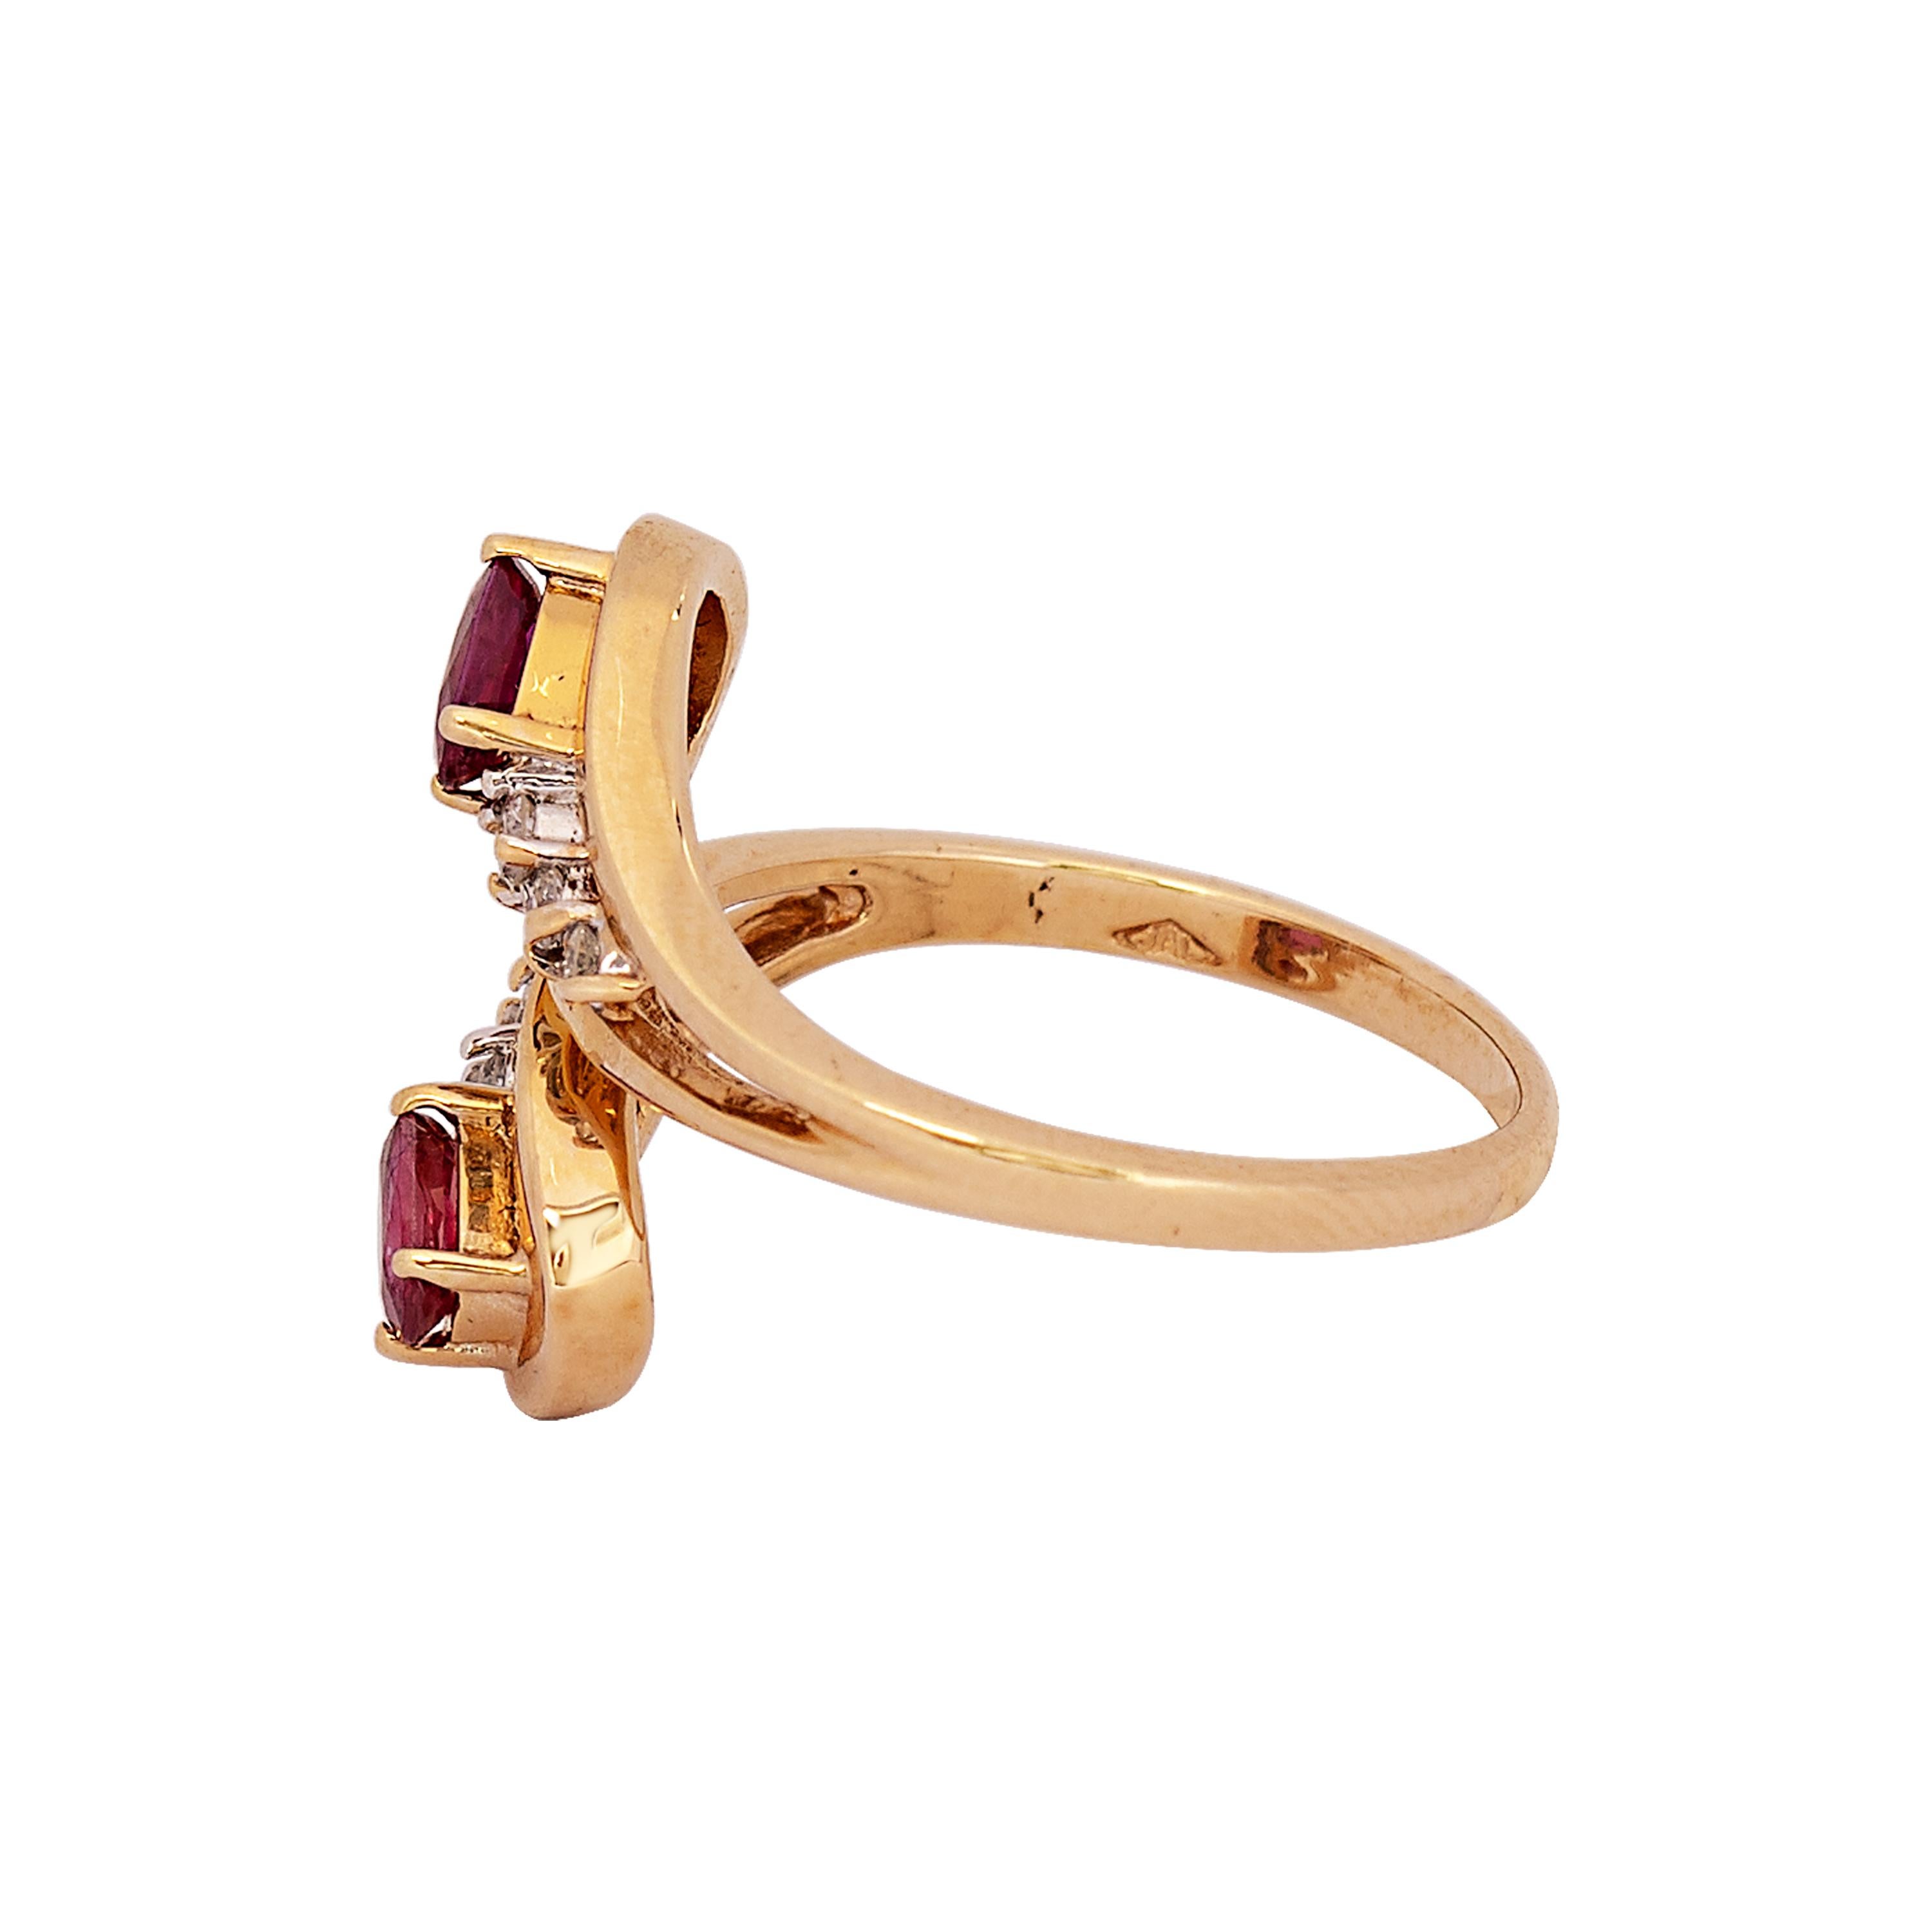 An elegant 14 karat yellow gold bypass ring comprised of graceful open teardrops each terminating in two oval cut rubies trailing a row of three round brilliant white diamonds. Each ruby weighs approximately .25 carats and the six round brilliant